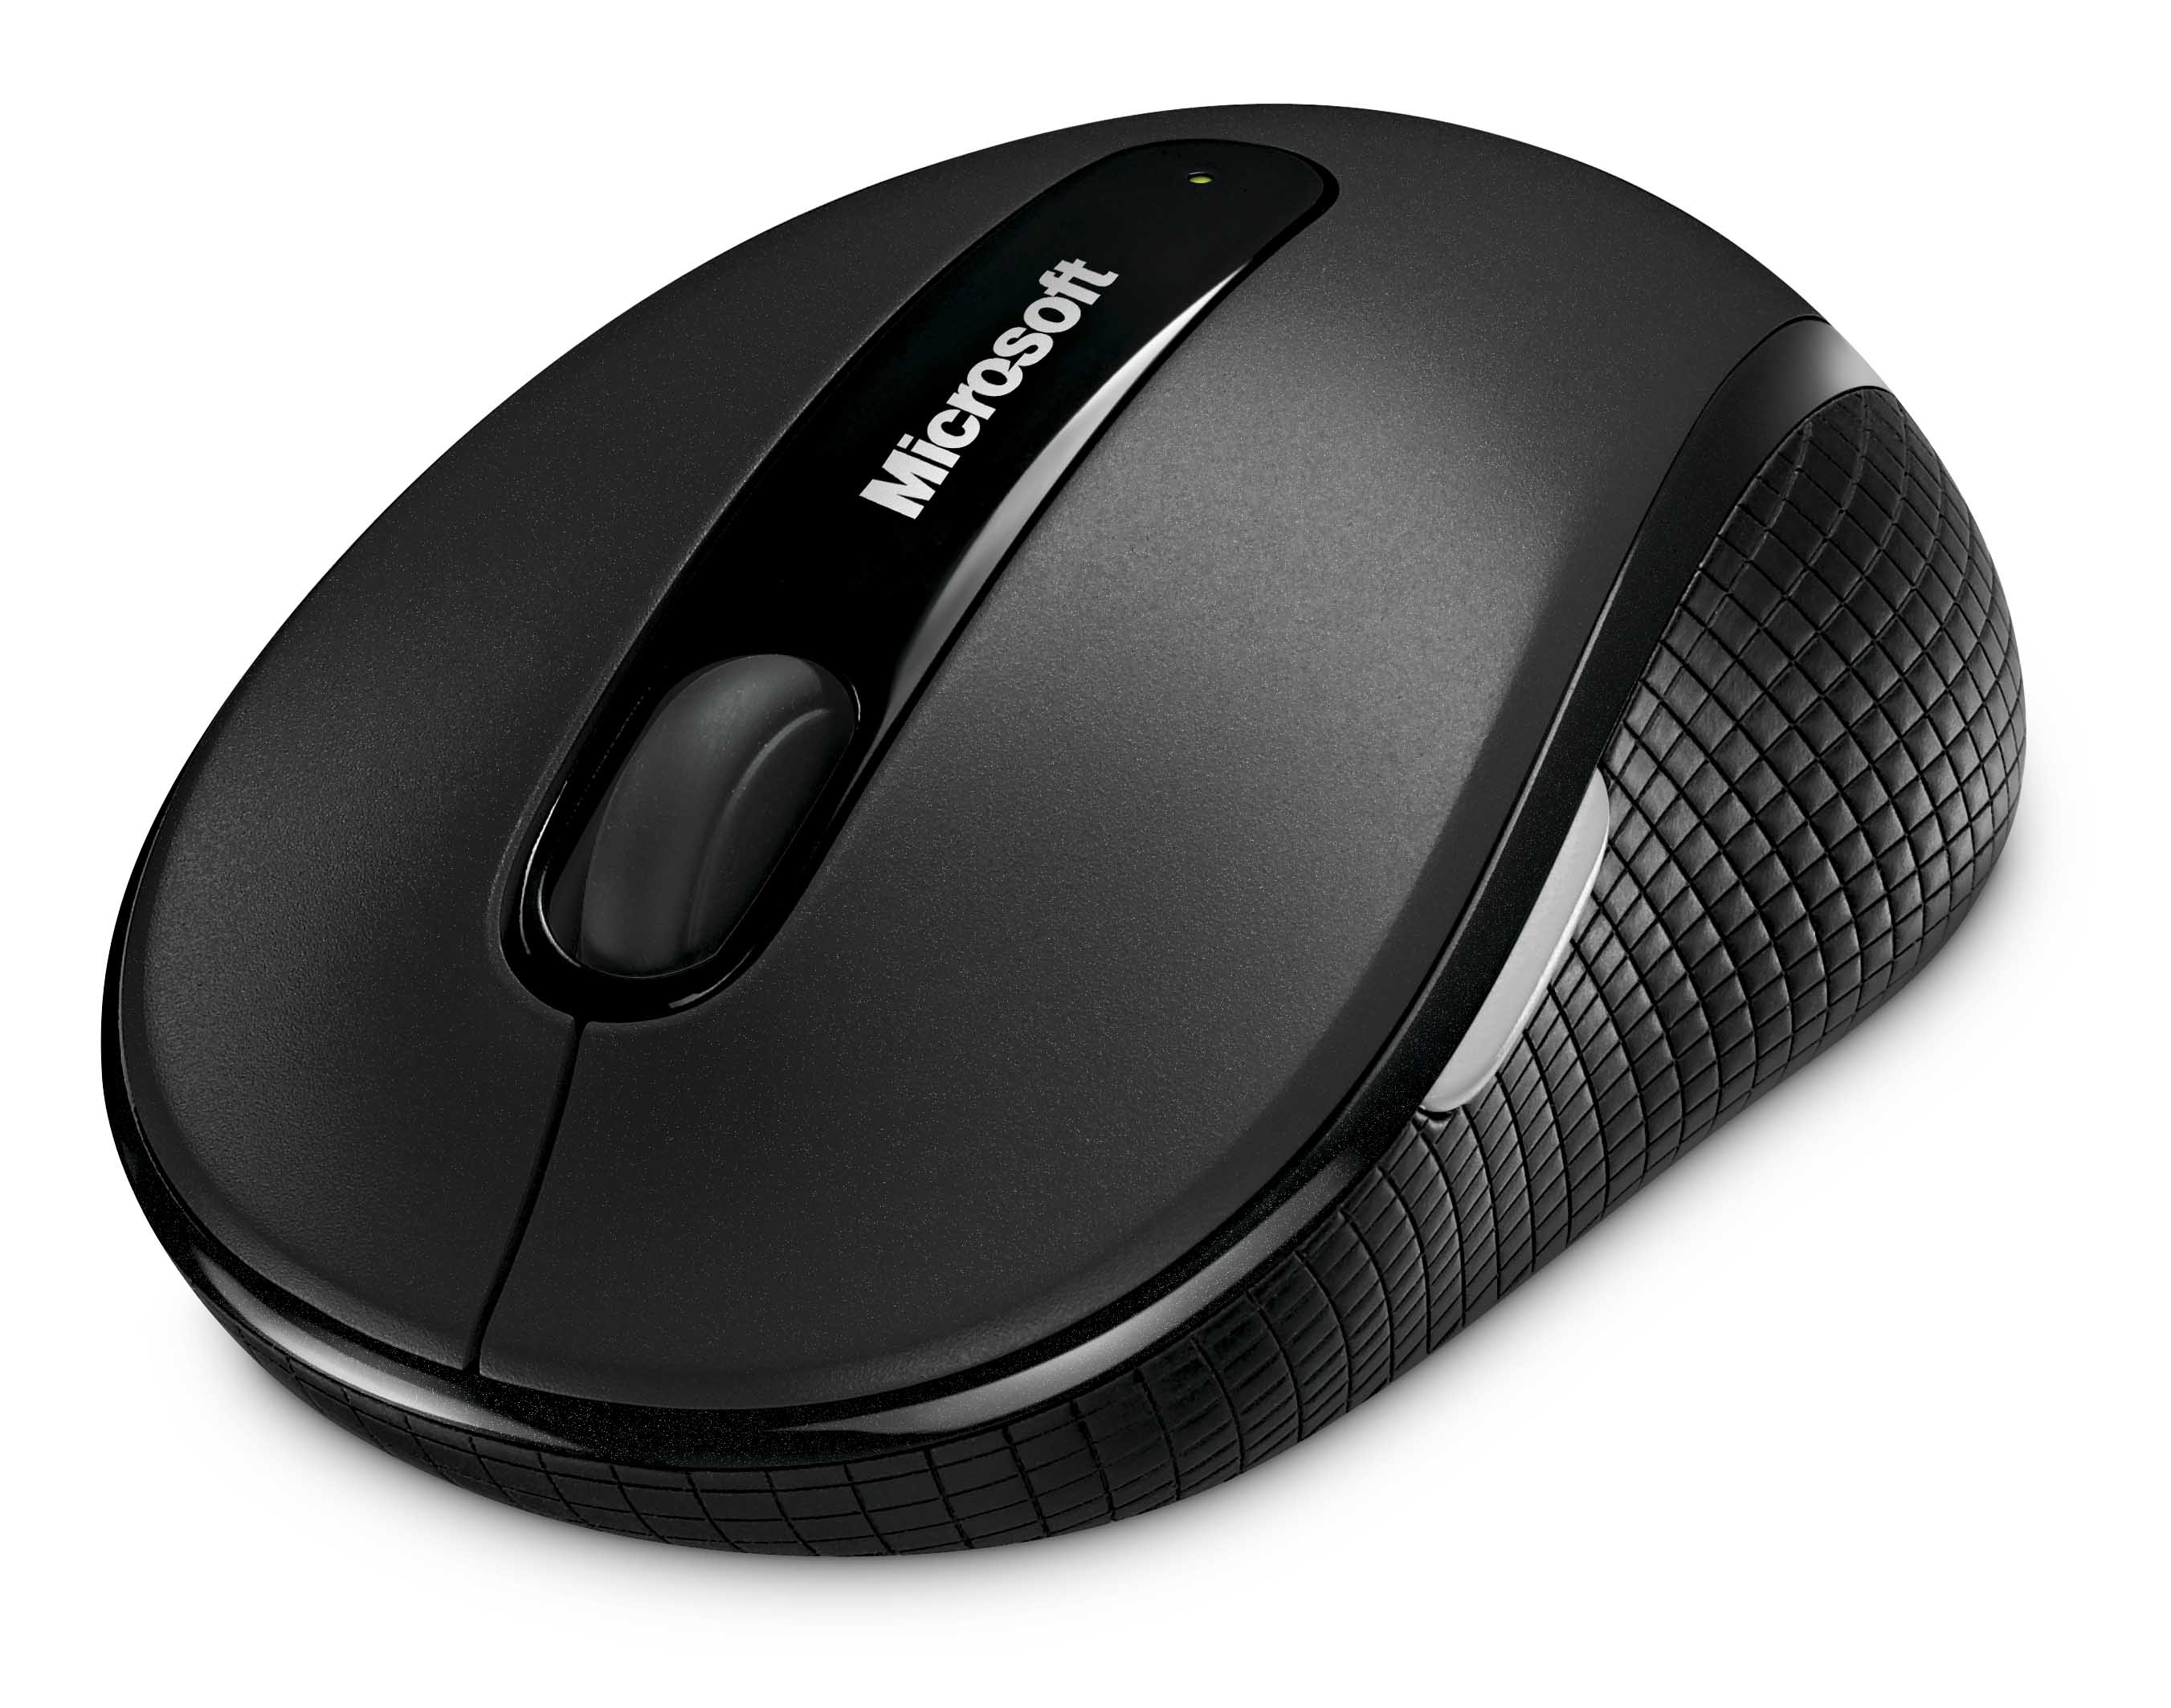 Microsoft 4000 Wireless Mobile Mouse - image 1 of 1